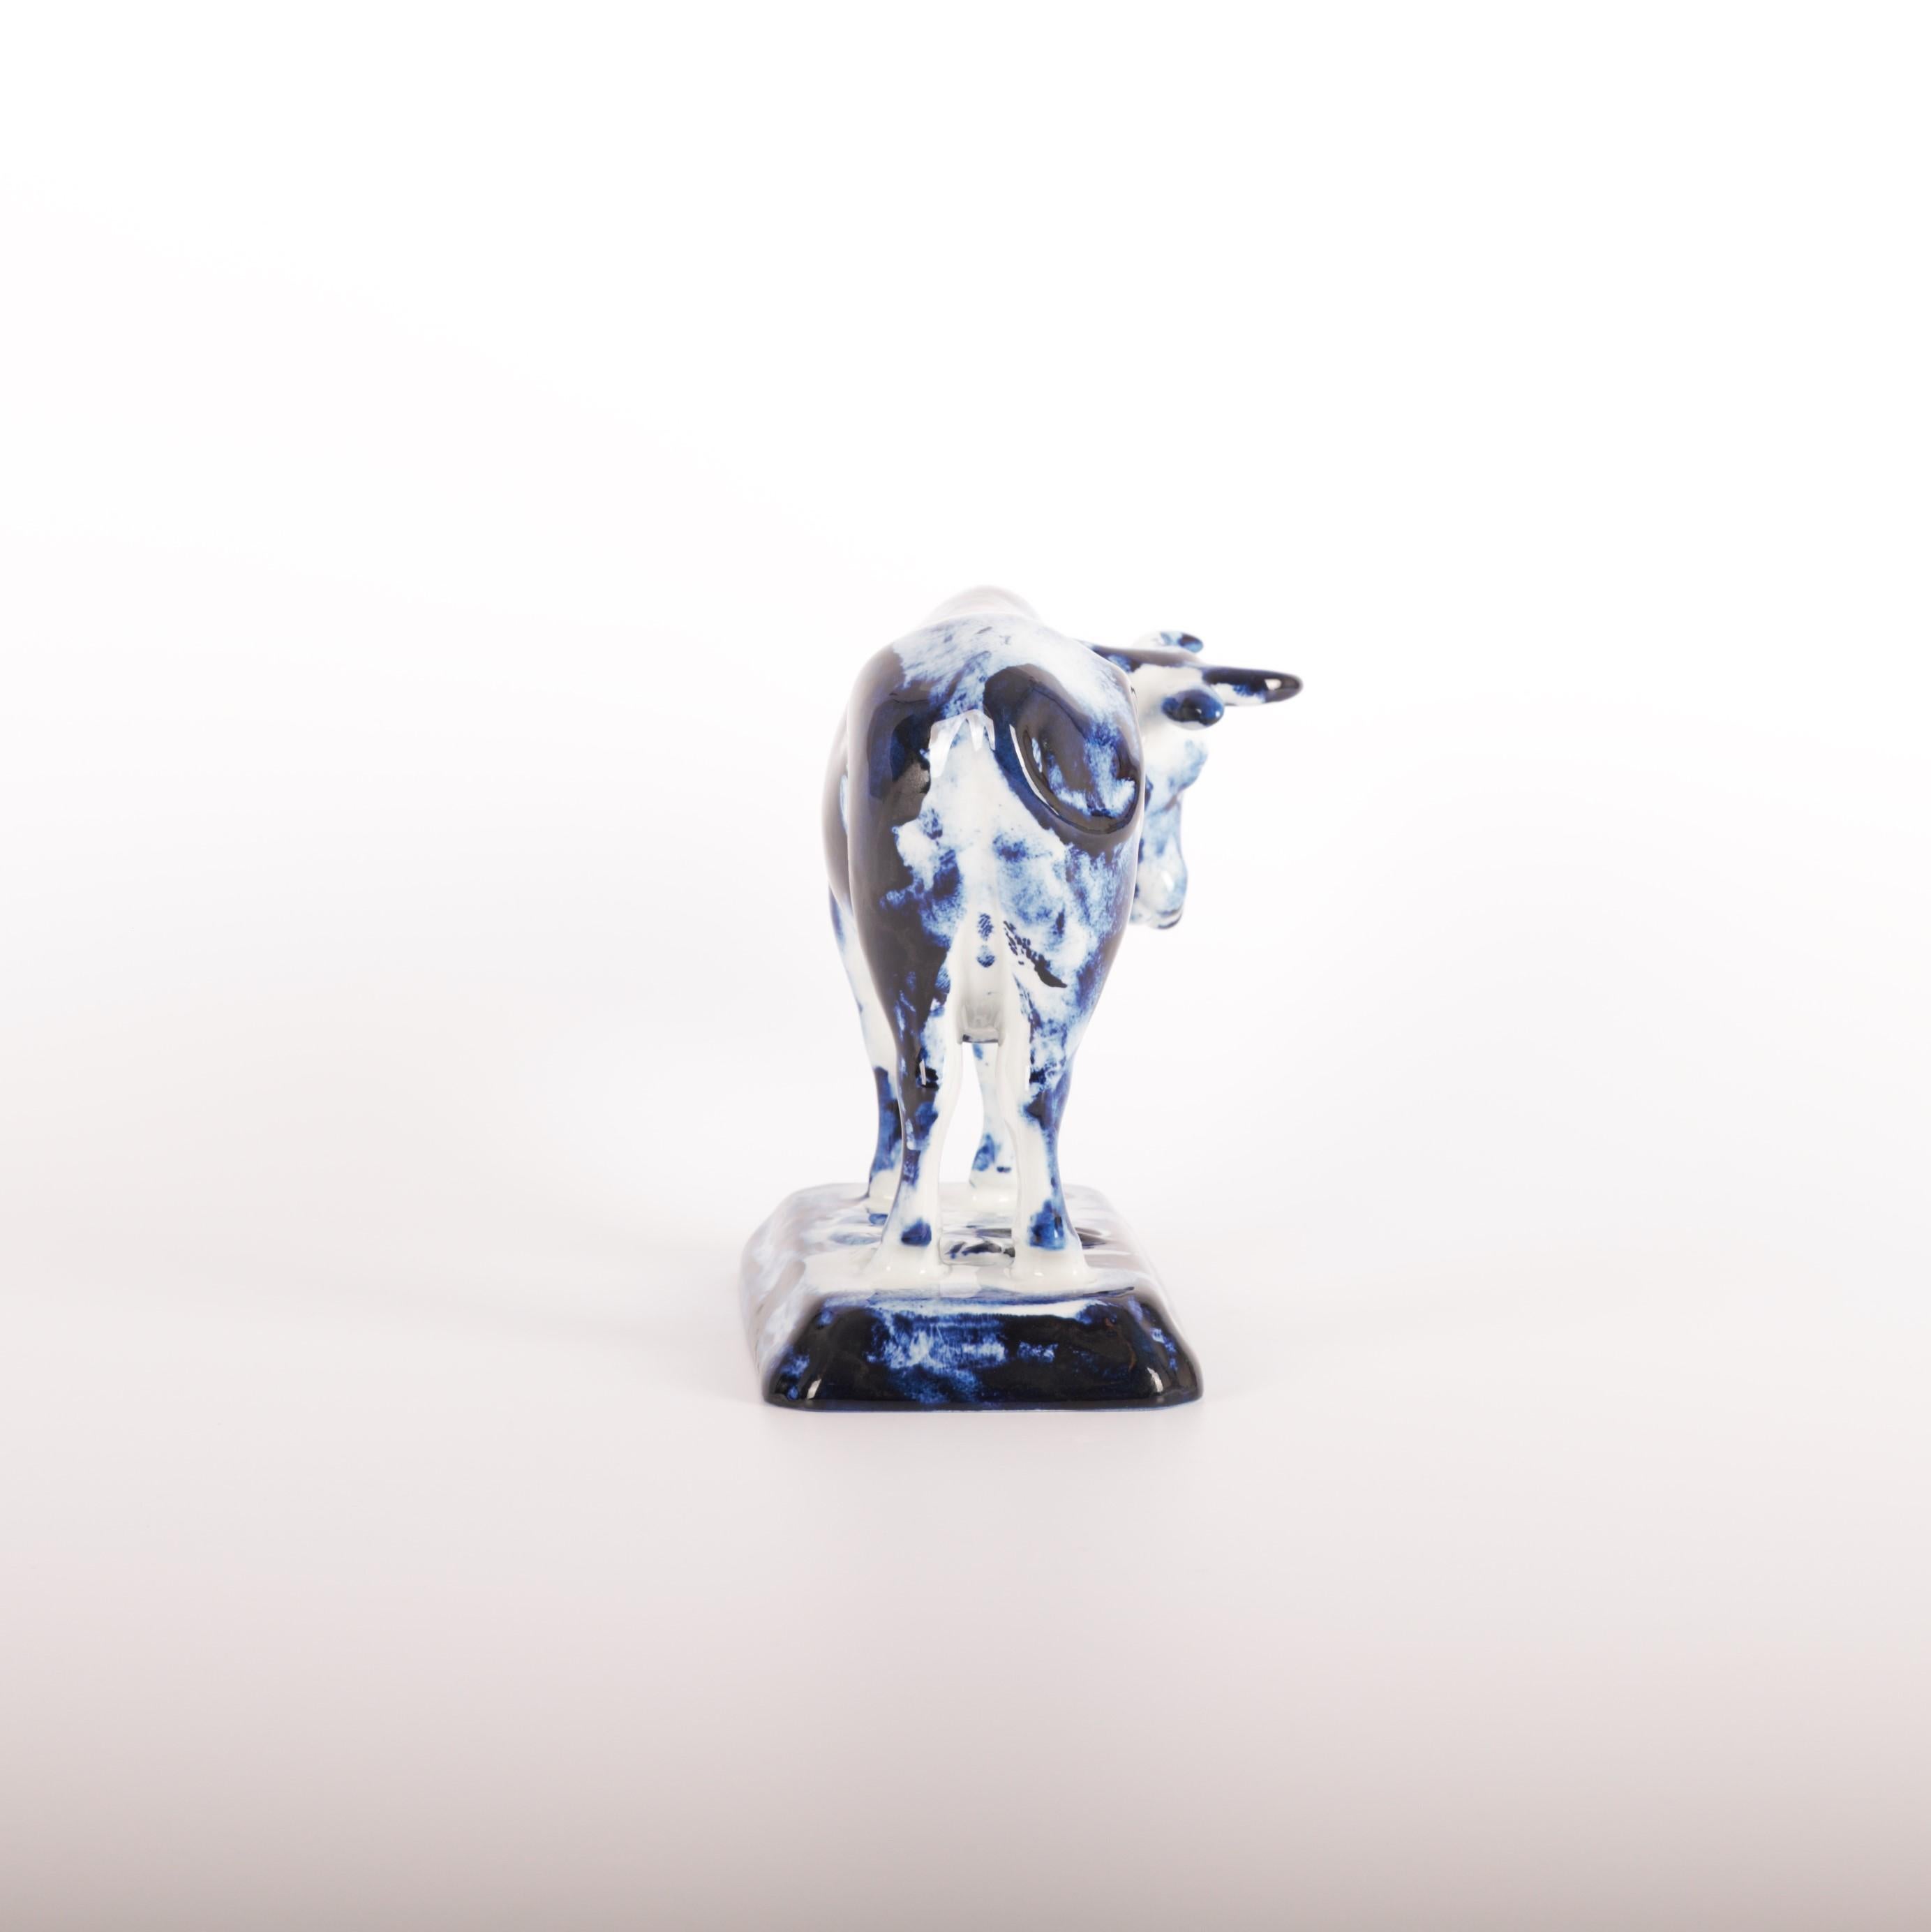 The Delft Blue Cow is available as an exclusive Personal Edition, Marcel Wanders' label carrying works of a more personal and experimental nature. The pieces of the Delft Blue series are unlimited unique by Marcel's one minute delft blue